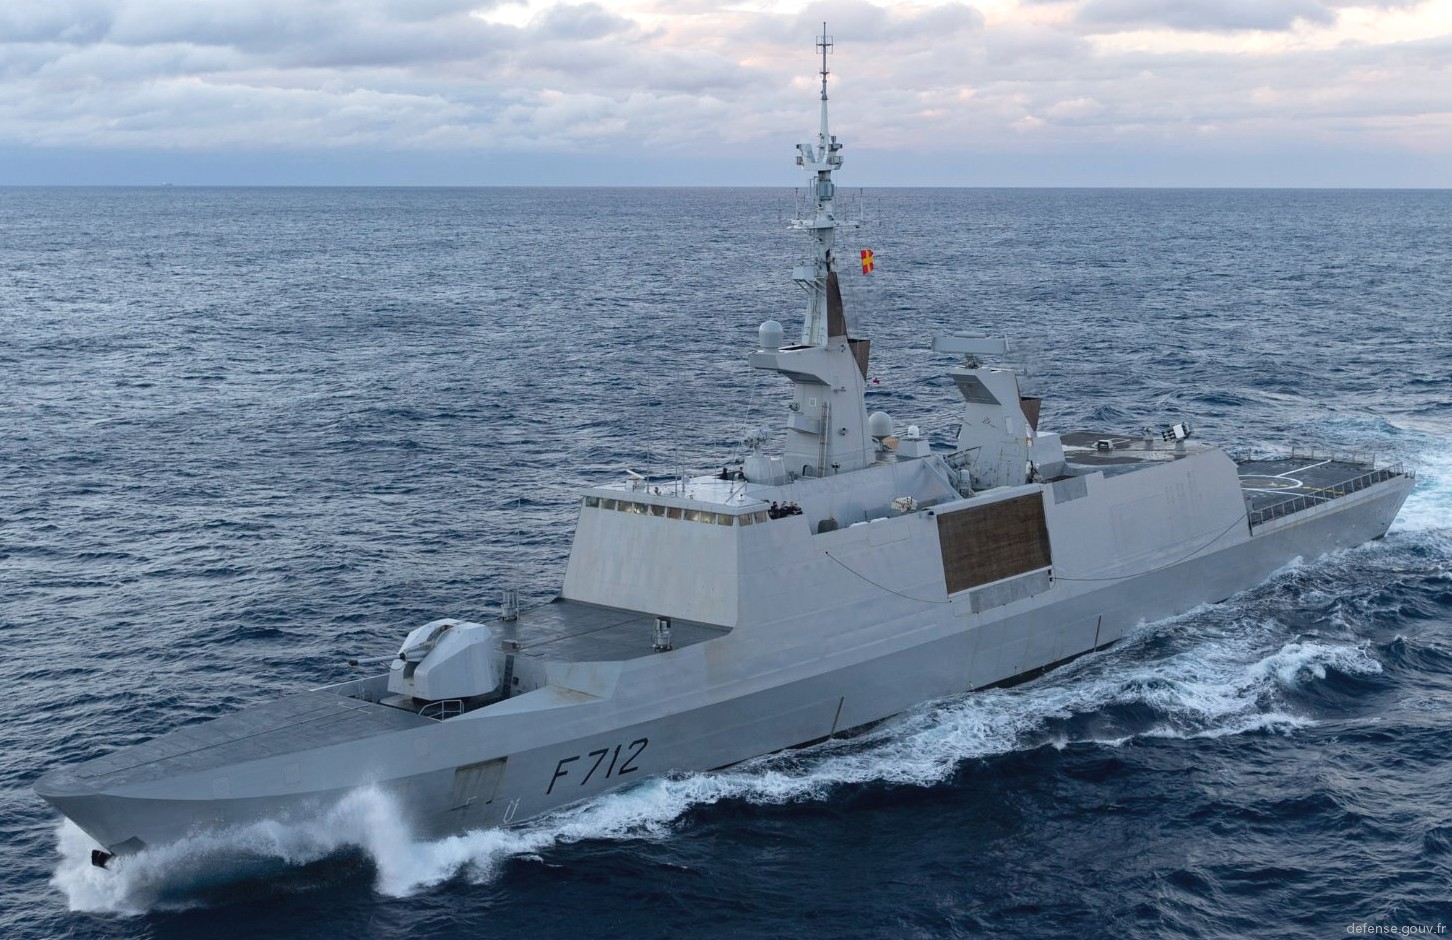 f-712 fs courbet la fayette class frigate french navy marine nationale 37